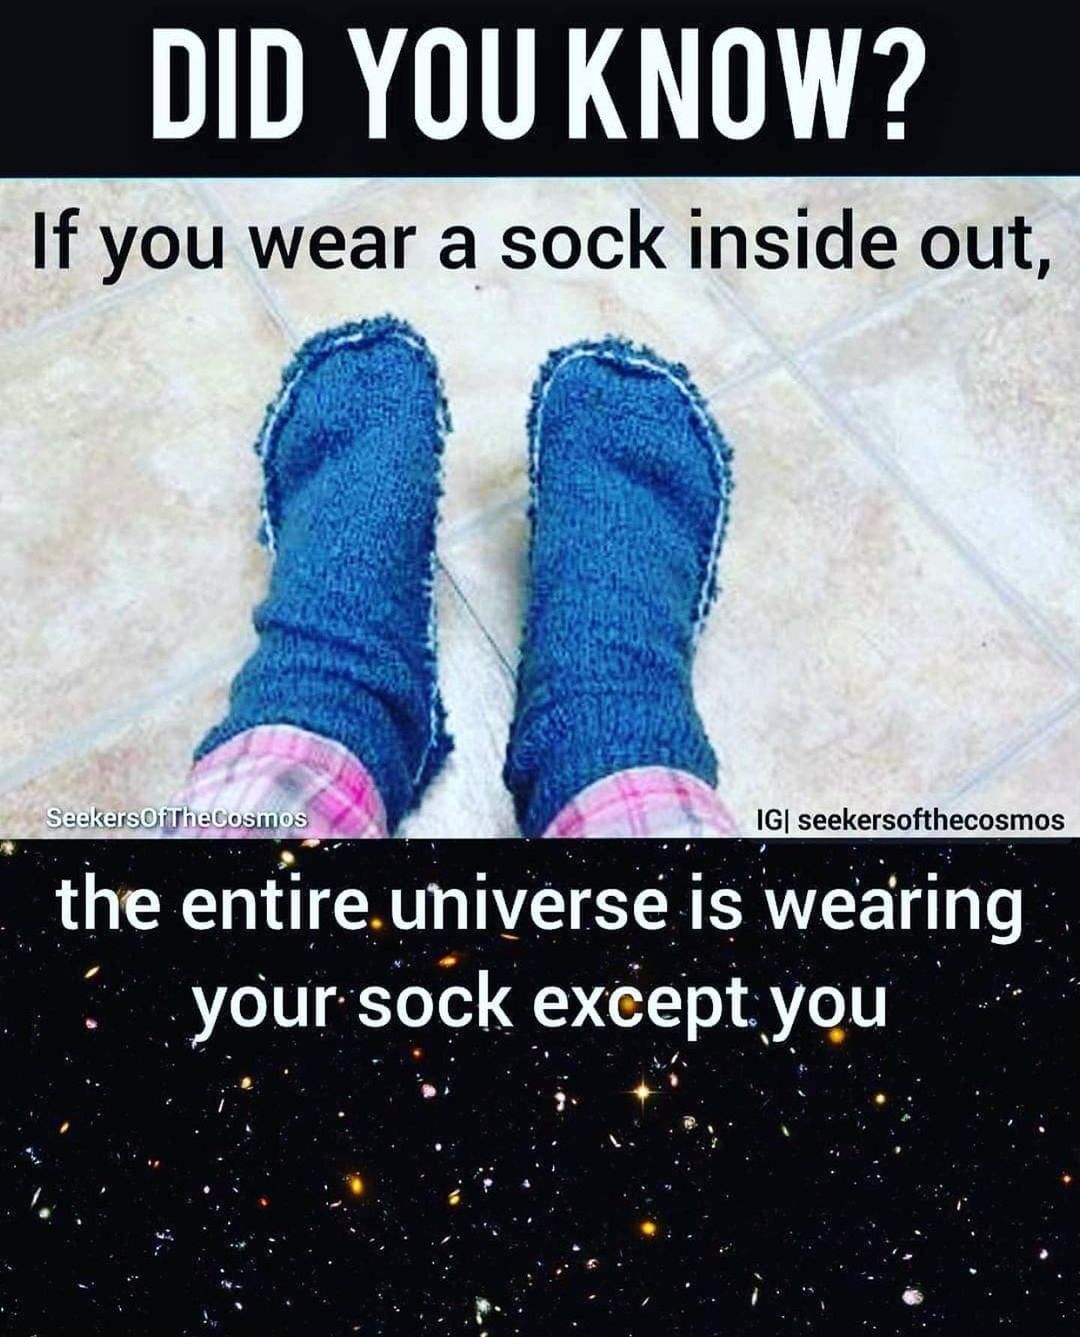 Did you know? If you wear a sock inside out, the entire universe is wearing your sock except you.